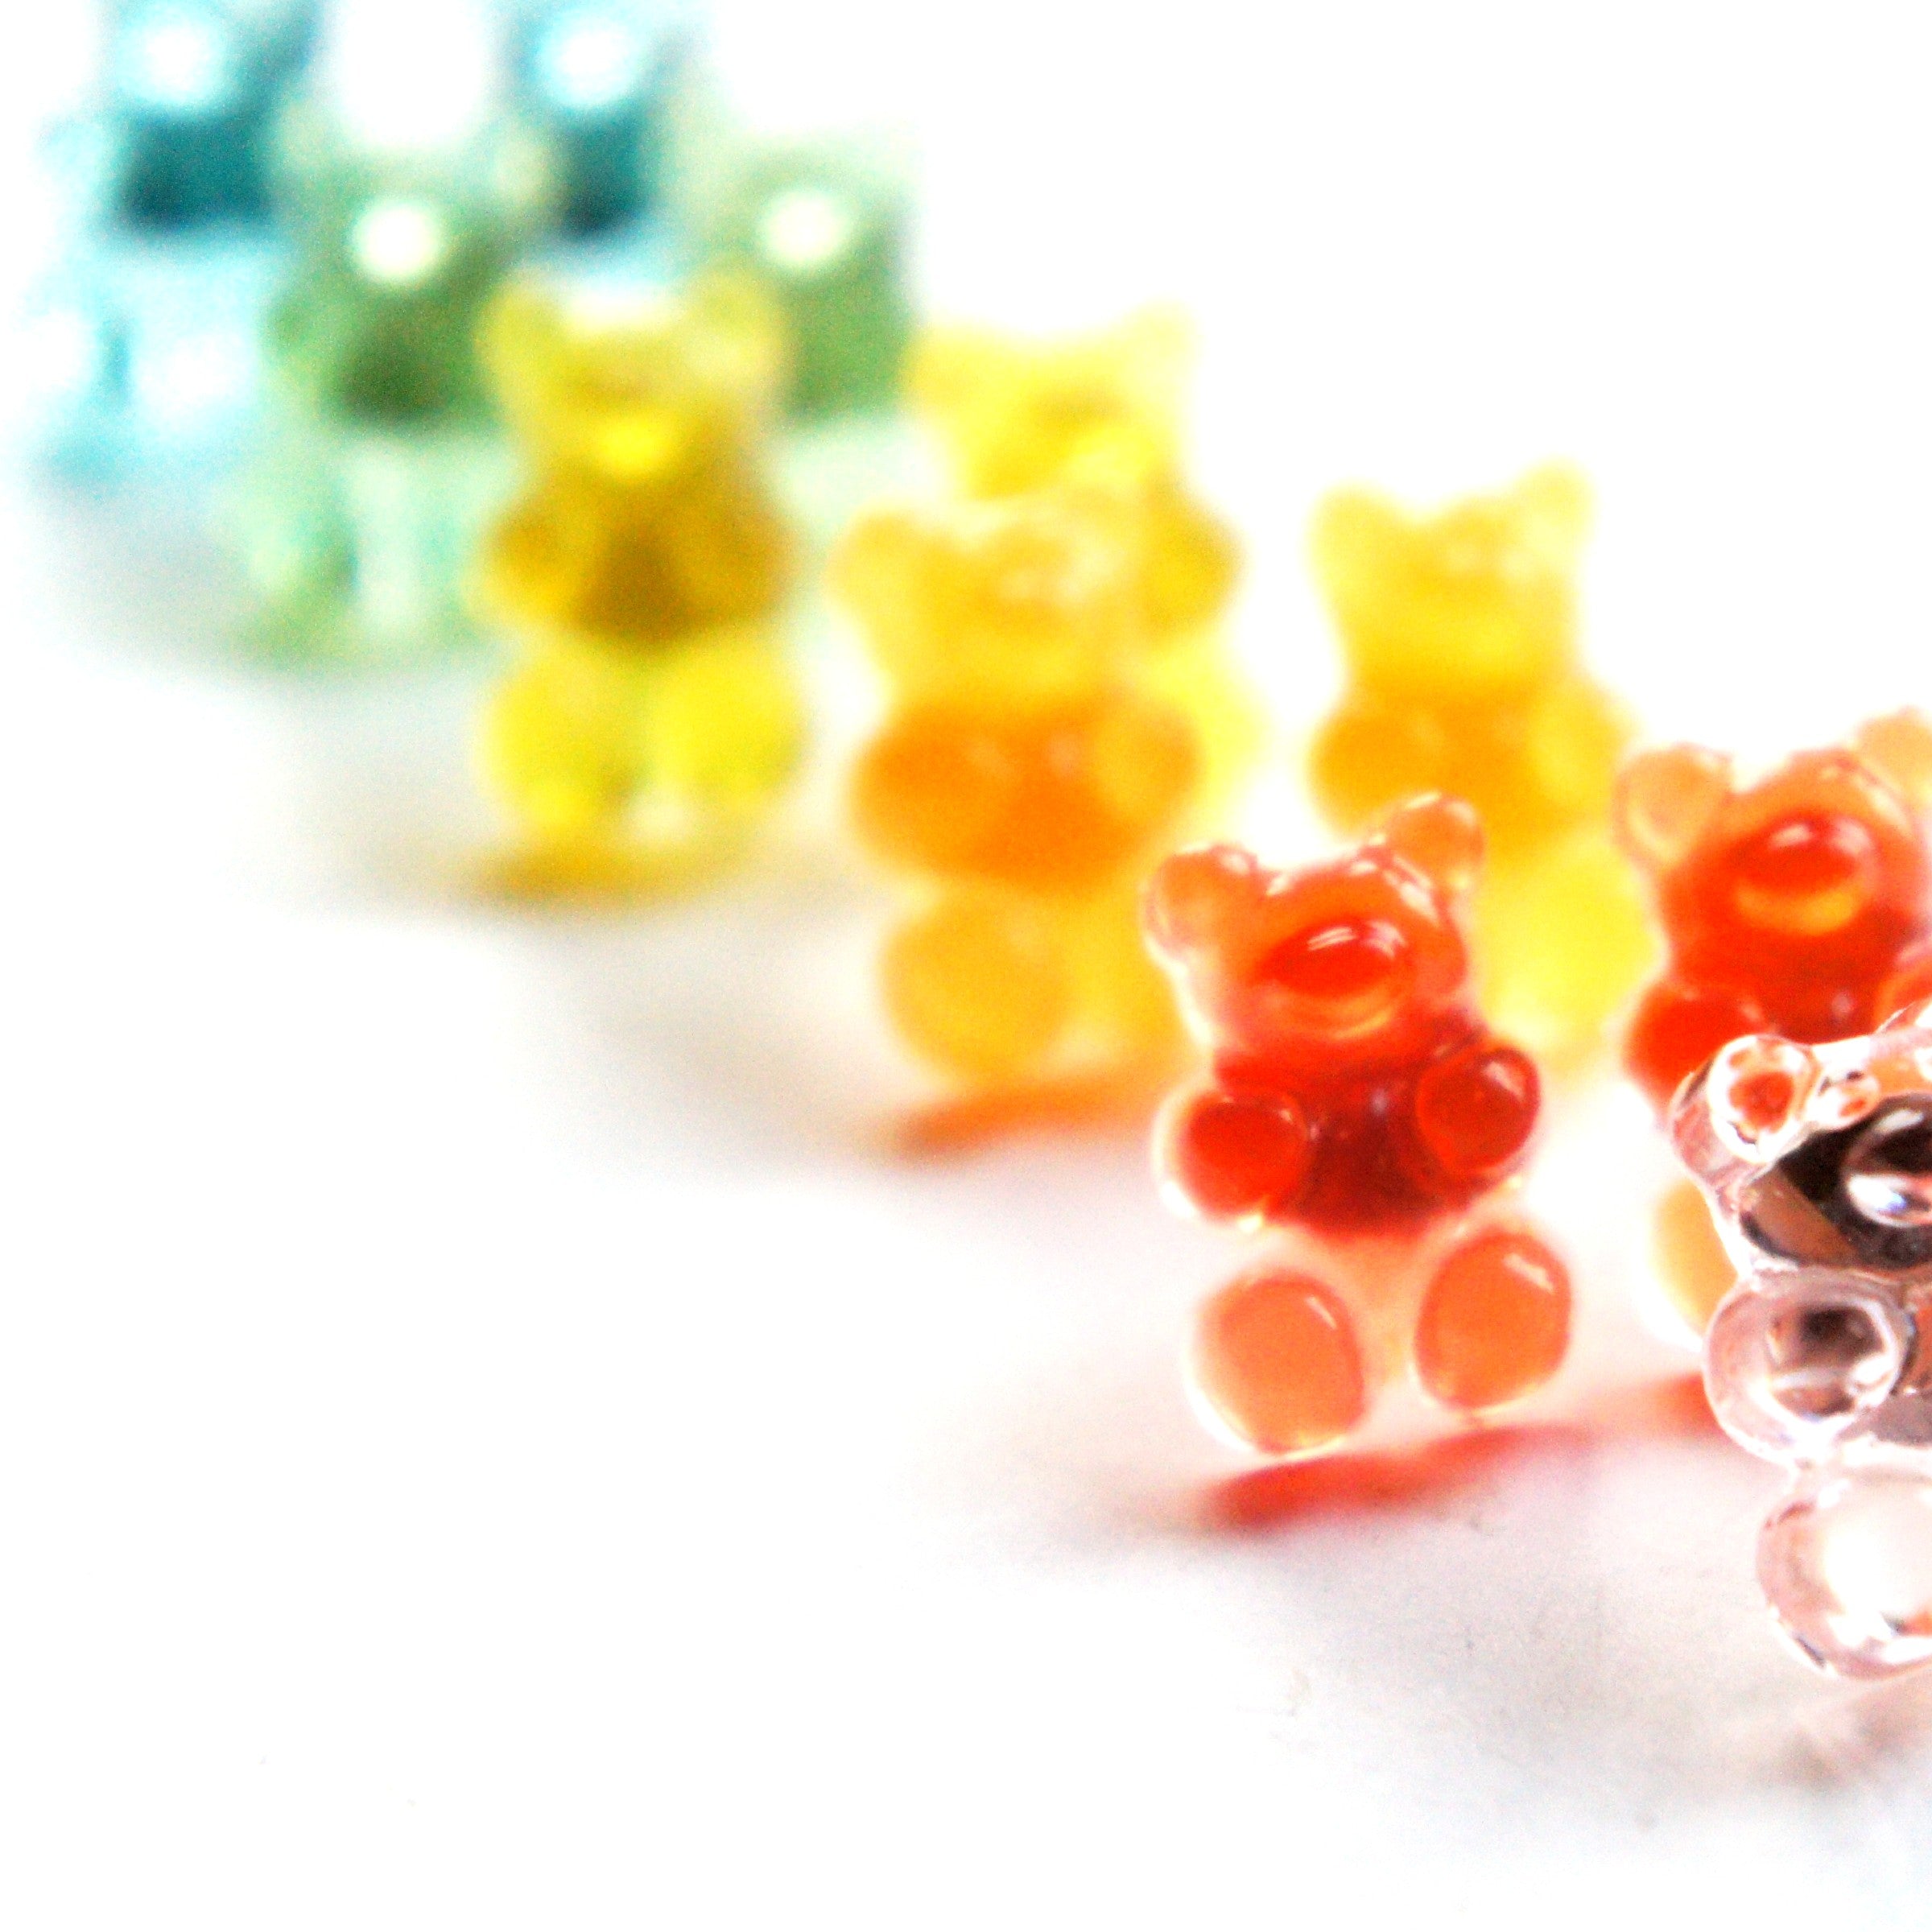 Gummy Bears Stud Earrings - Jillicious charms and accessories